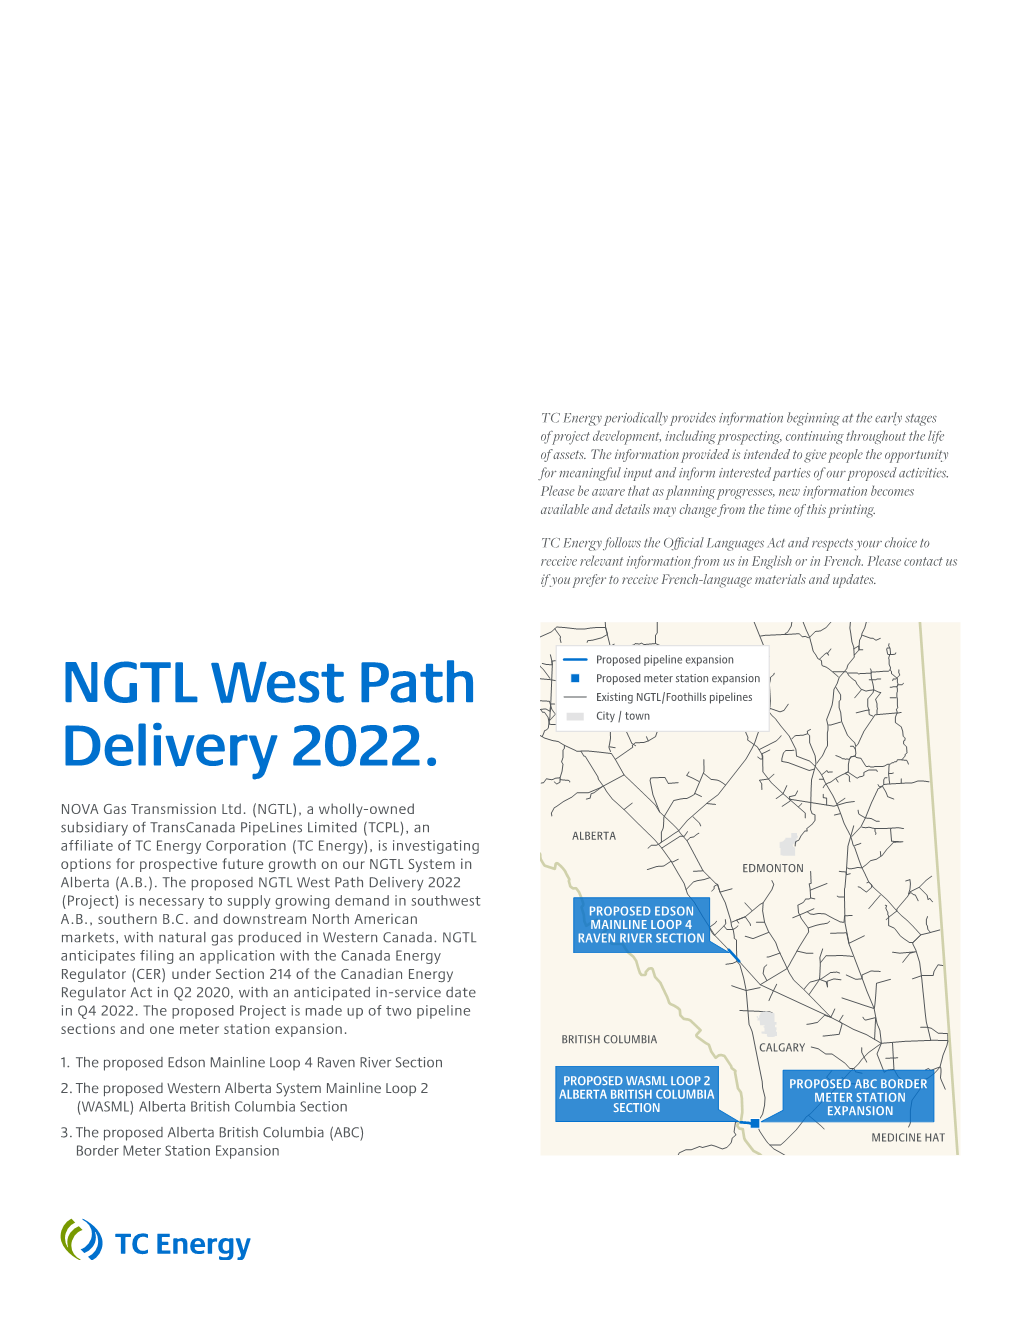 NGTL West Path Delivery 2022